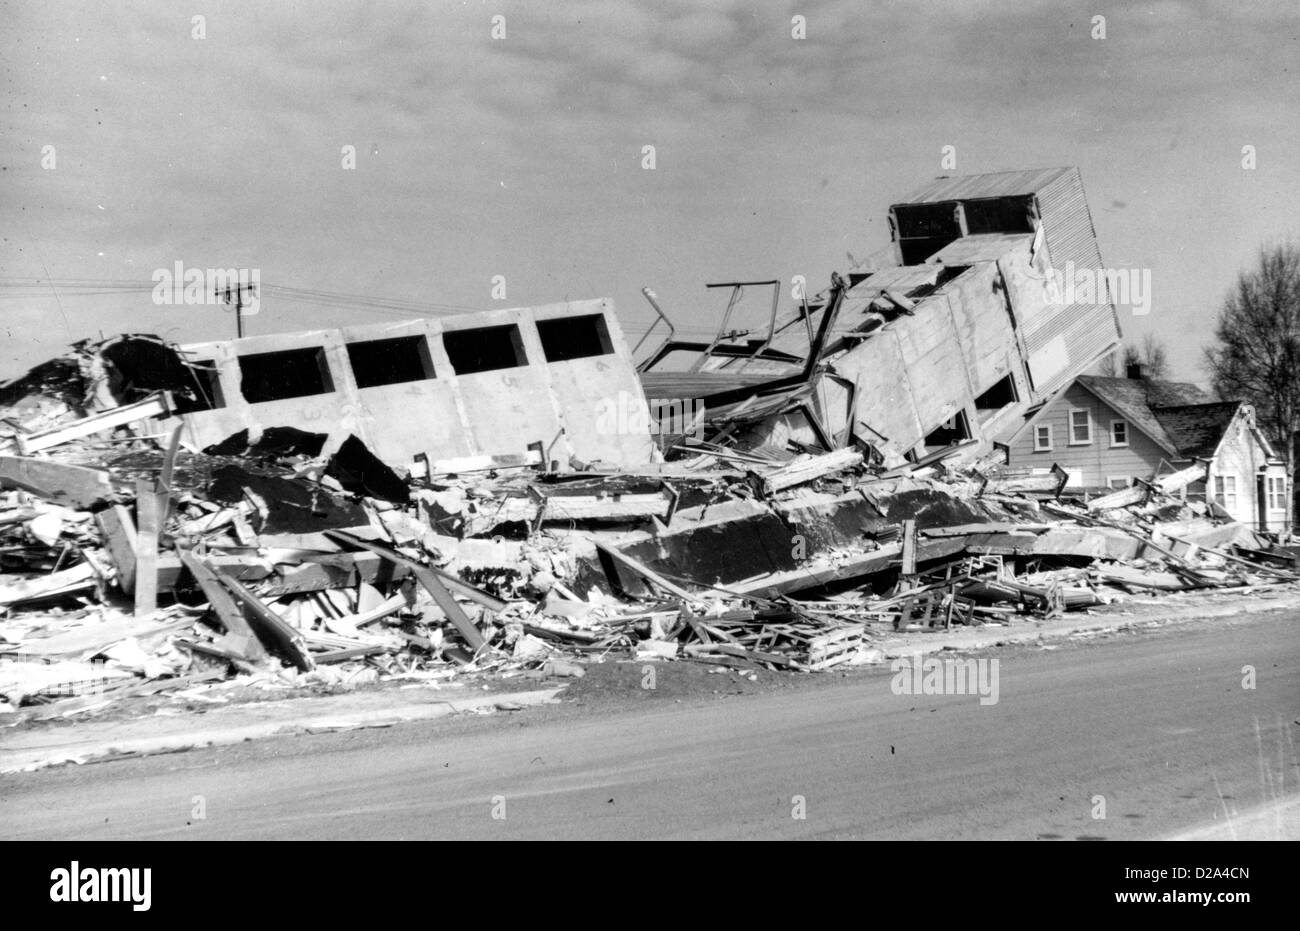 Alaska Earthquake March 27 1964 Seismic Shock Damage In Anchorage Four Seasons Apartment Building Which Was Under Construction Stock Photo